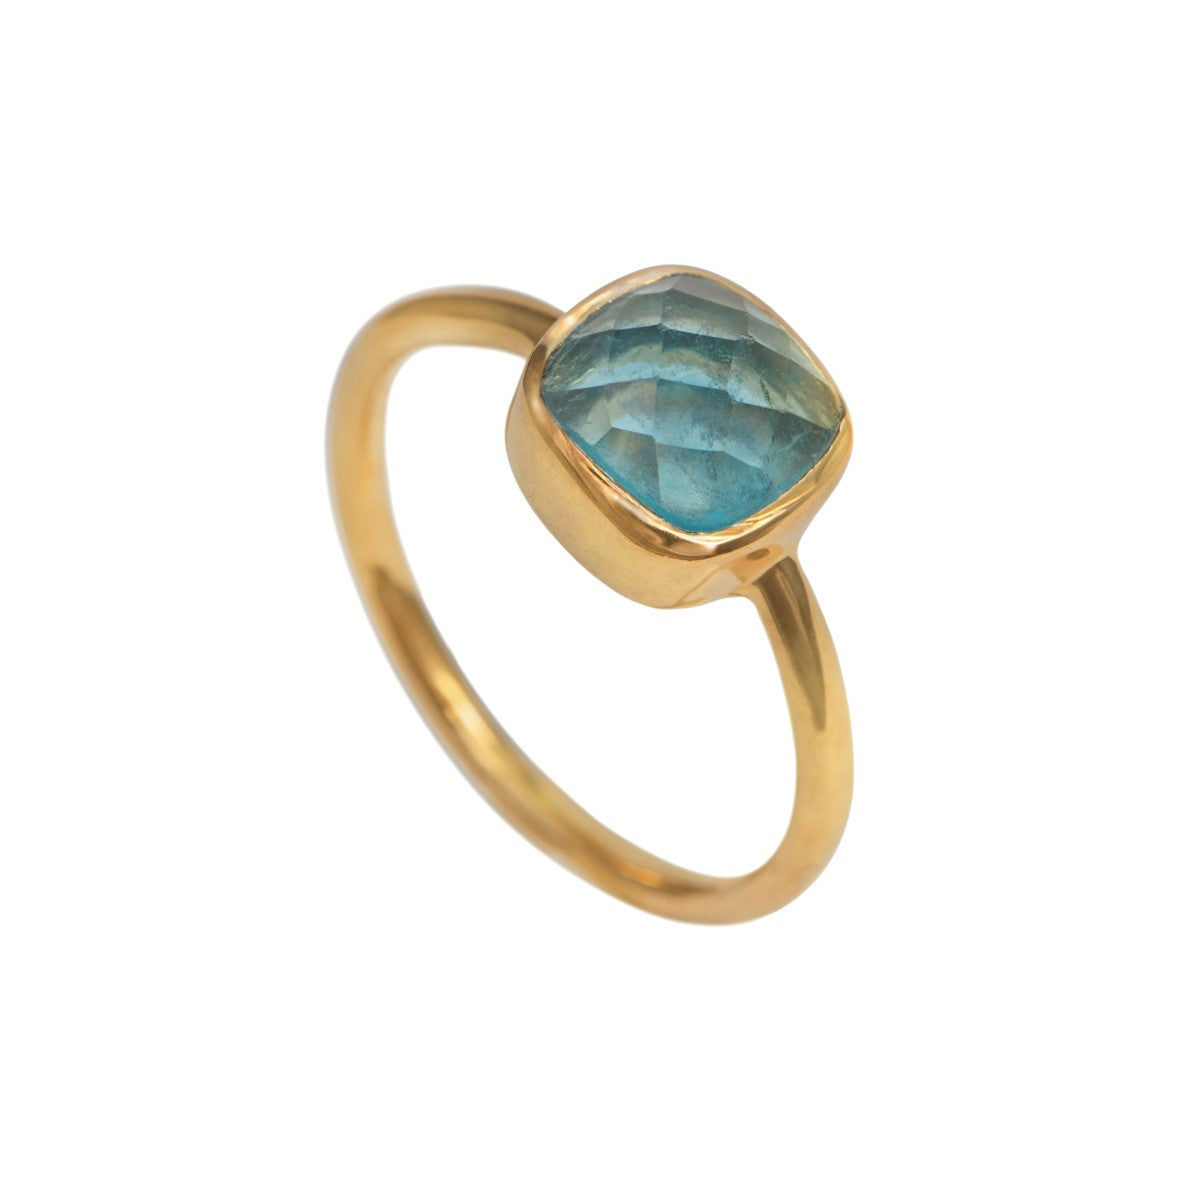 Faceted Square Cut Natural Gemstone Gold Plated Sterling Silver Solitaire Ring - Apatite